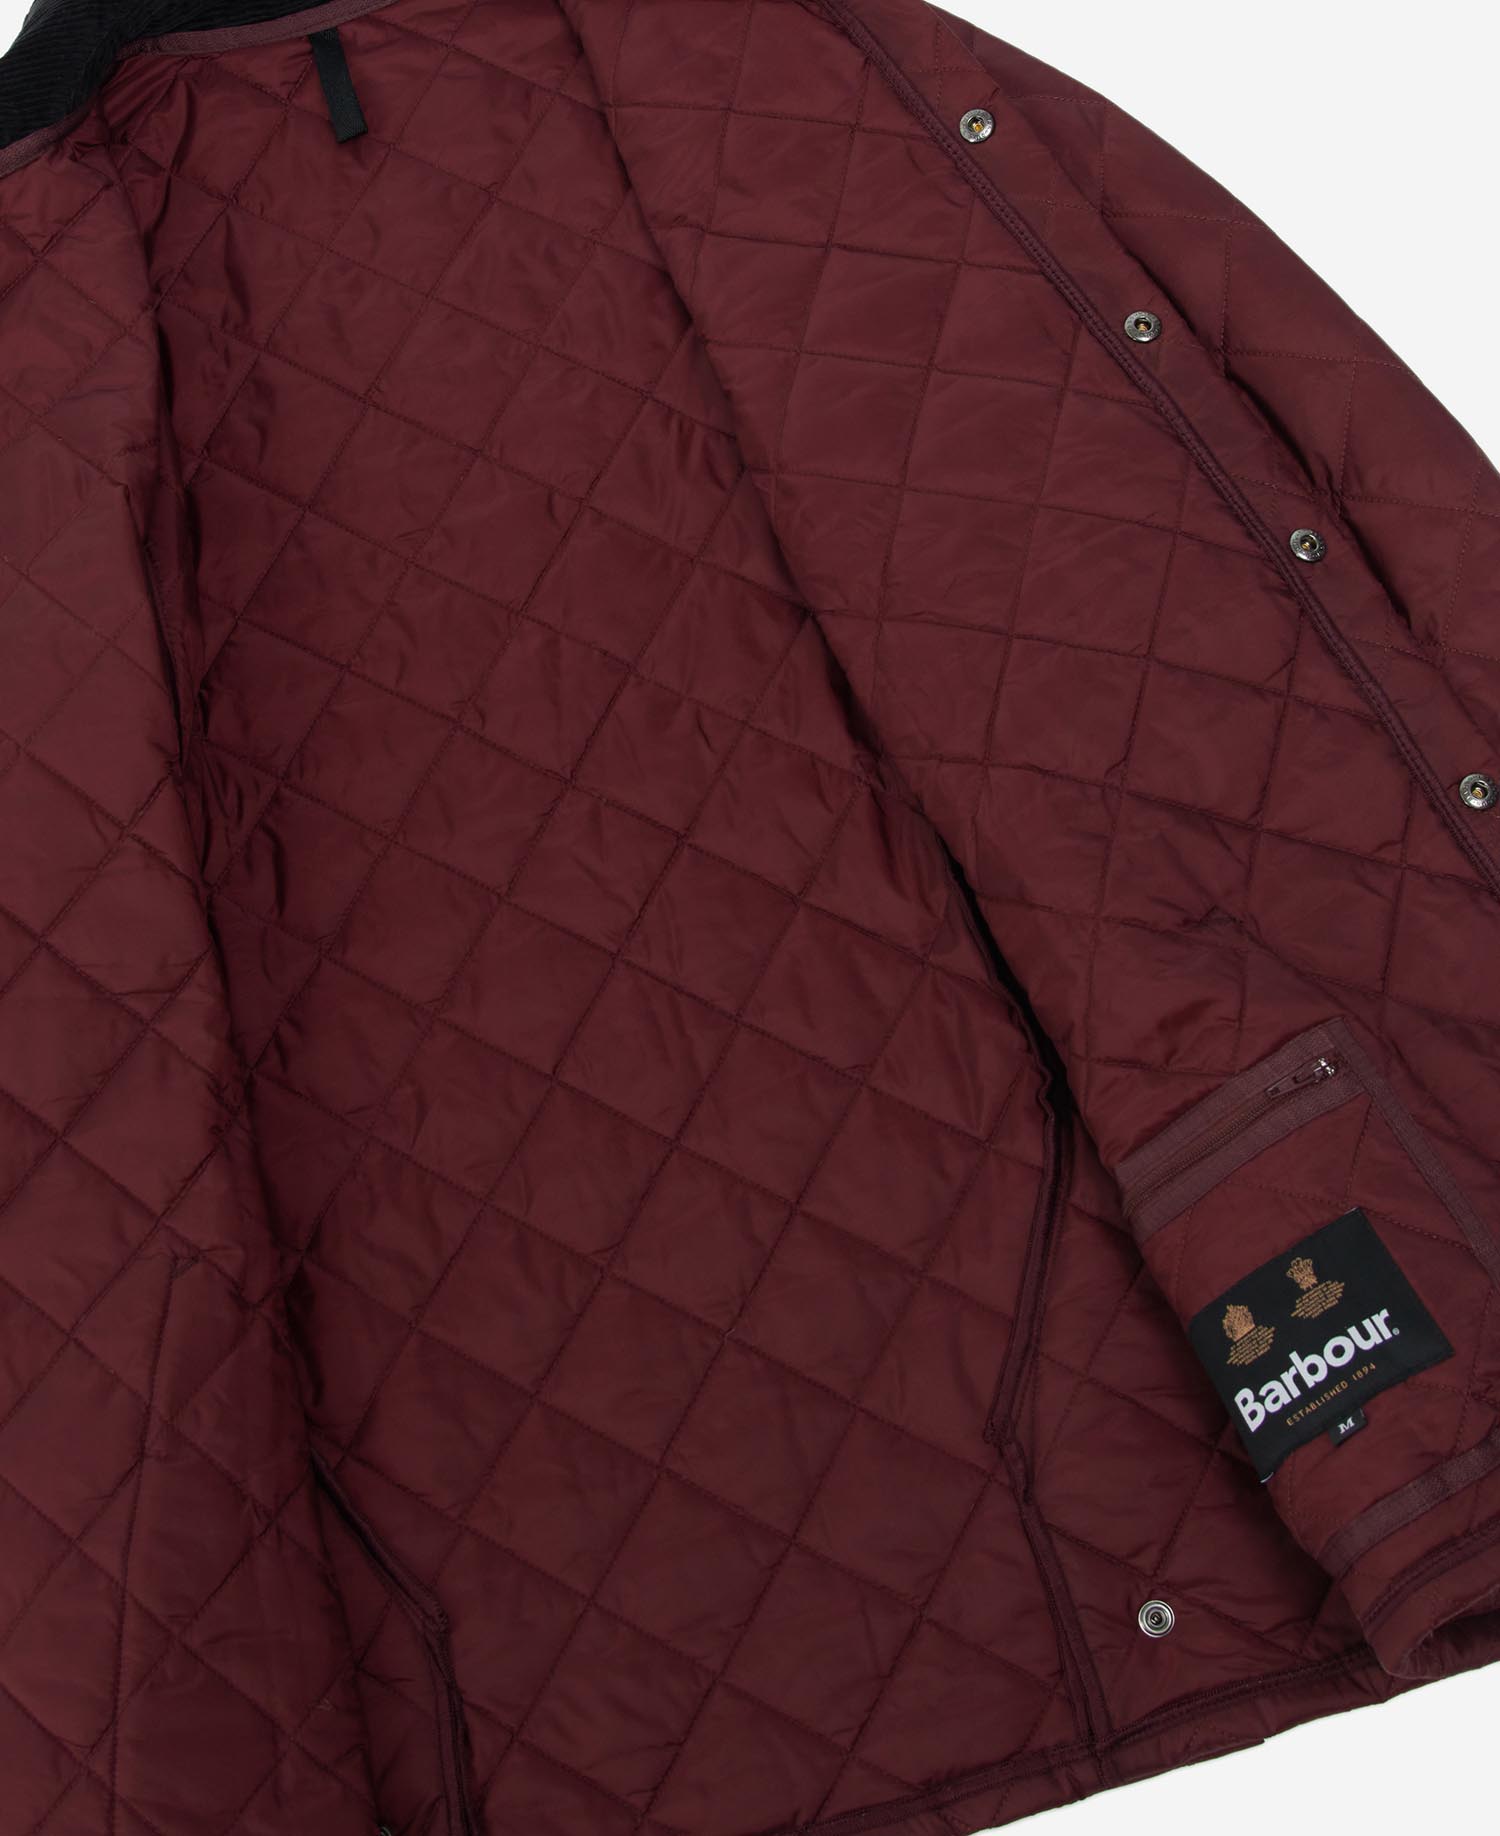 hypothese Zwembad krater Shop the Barbour Heritage Liddesdale Quilted Jacket today. | Barbour